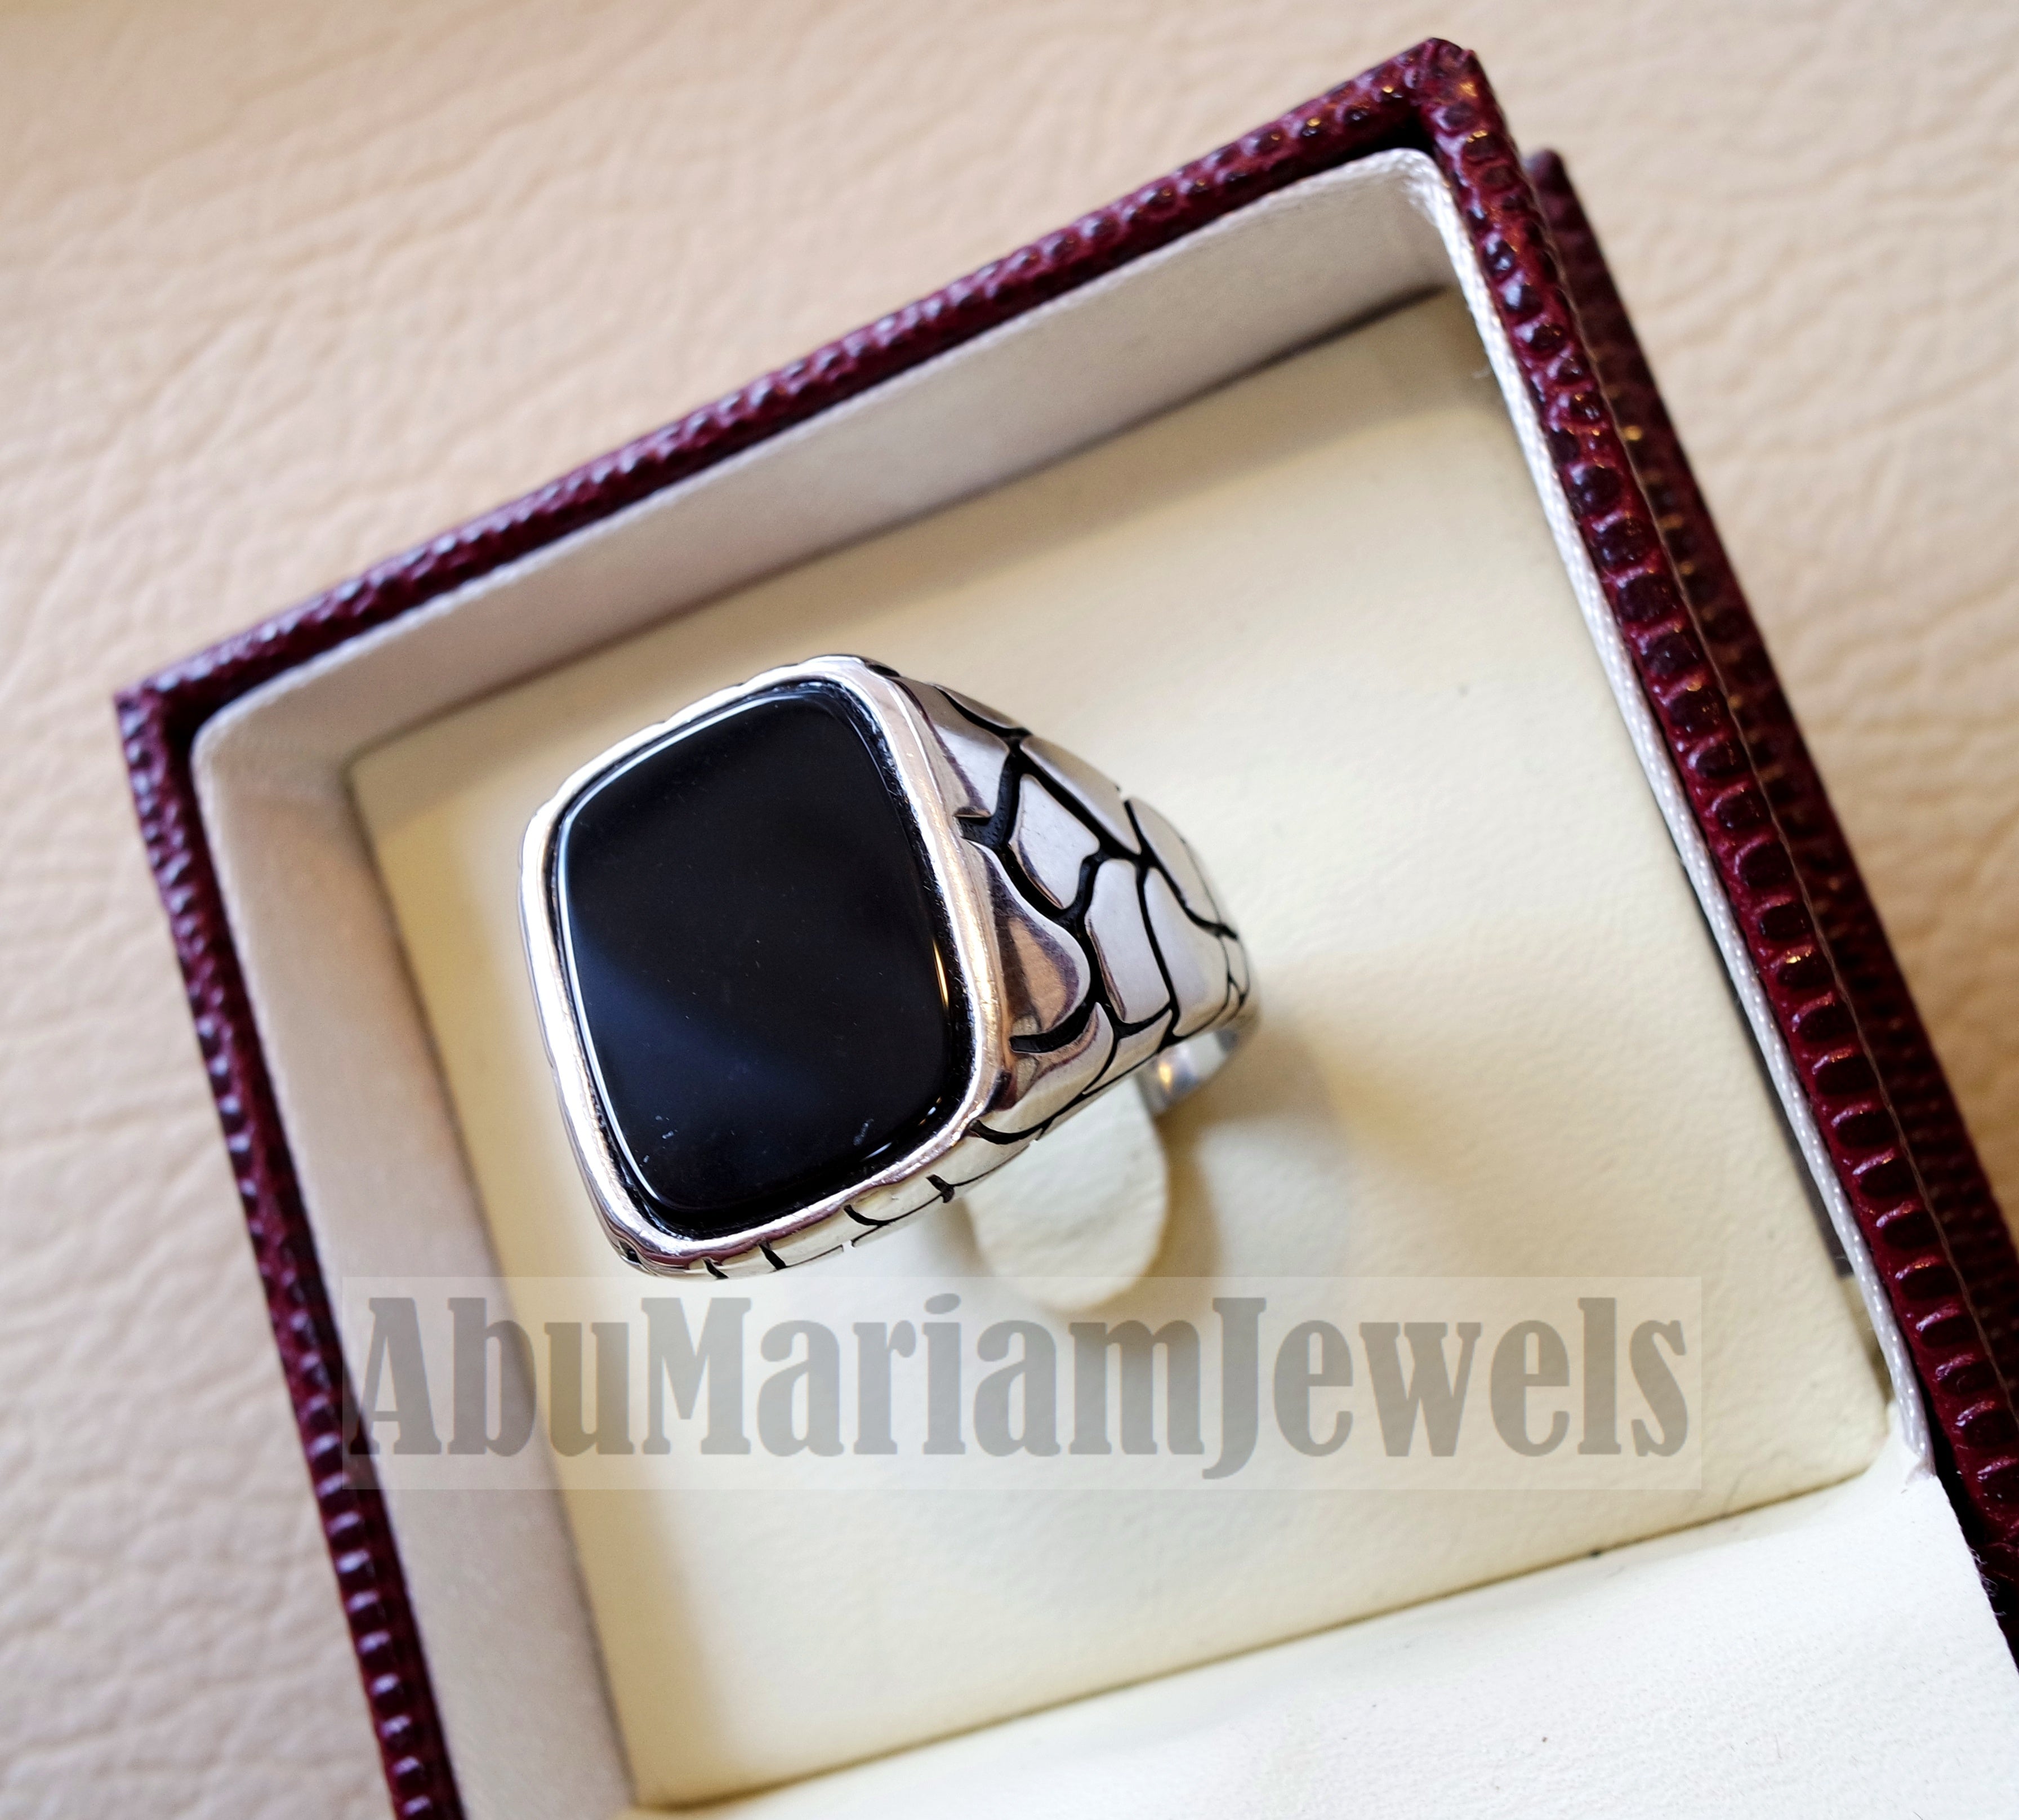 cushion rectangular octagon black onyx agate aqeeq man signet ring sterling silver 925 natural stone all sizes jewelry fast shipping